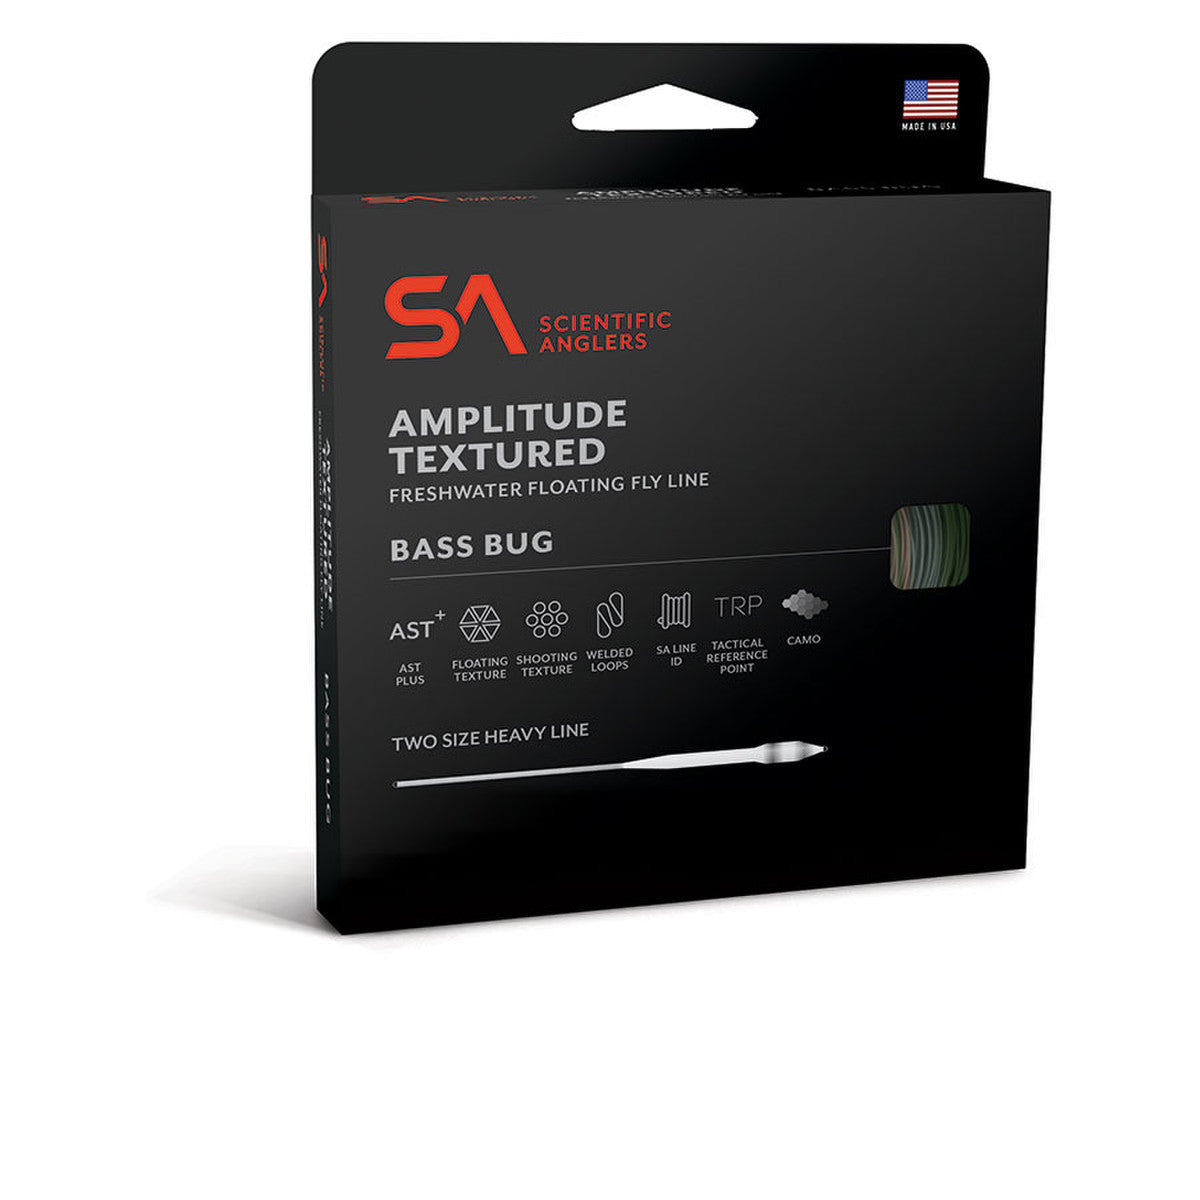 Scientific Anglers Amplitude Textured Bass Bug Camo Fly Line - New!